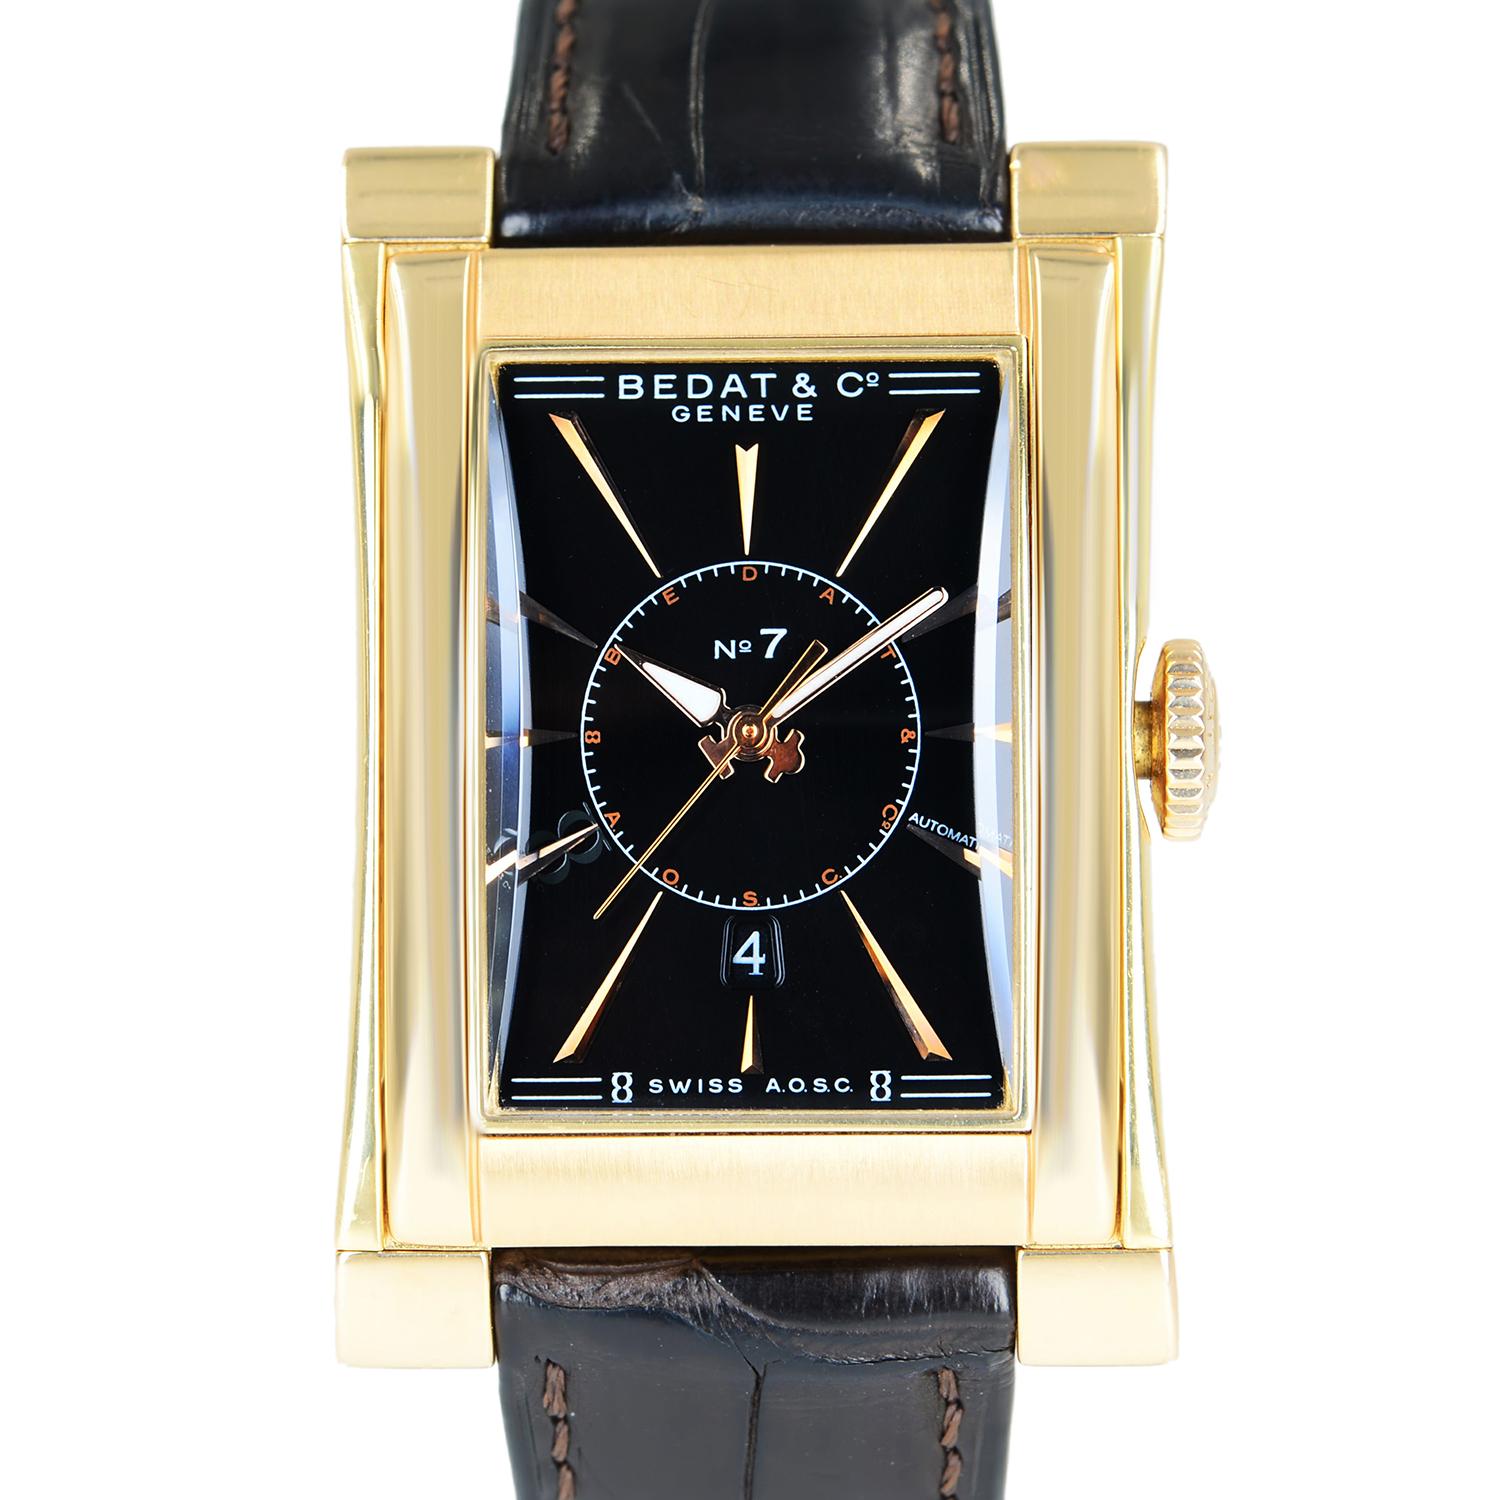 This pre-owned Bedat & Co Nº7  737 is a beautiful men's timepiece that is powered by mechanical (automatic) movement which is cased in a 18K yellow gold case. It has a  rectangle shape face, date indicator dial and has hand sticks style markers. It